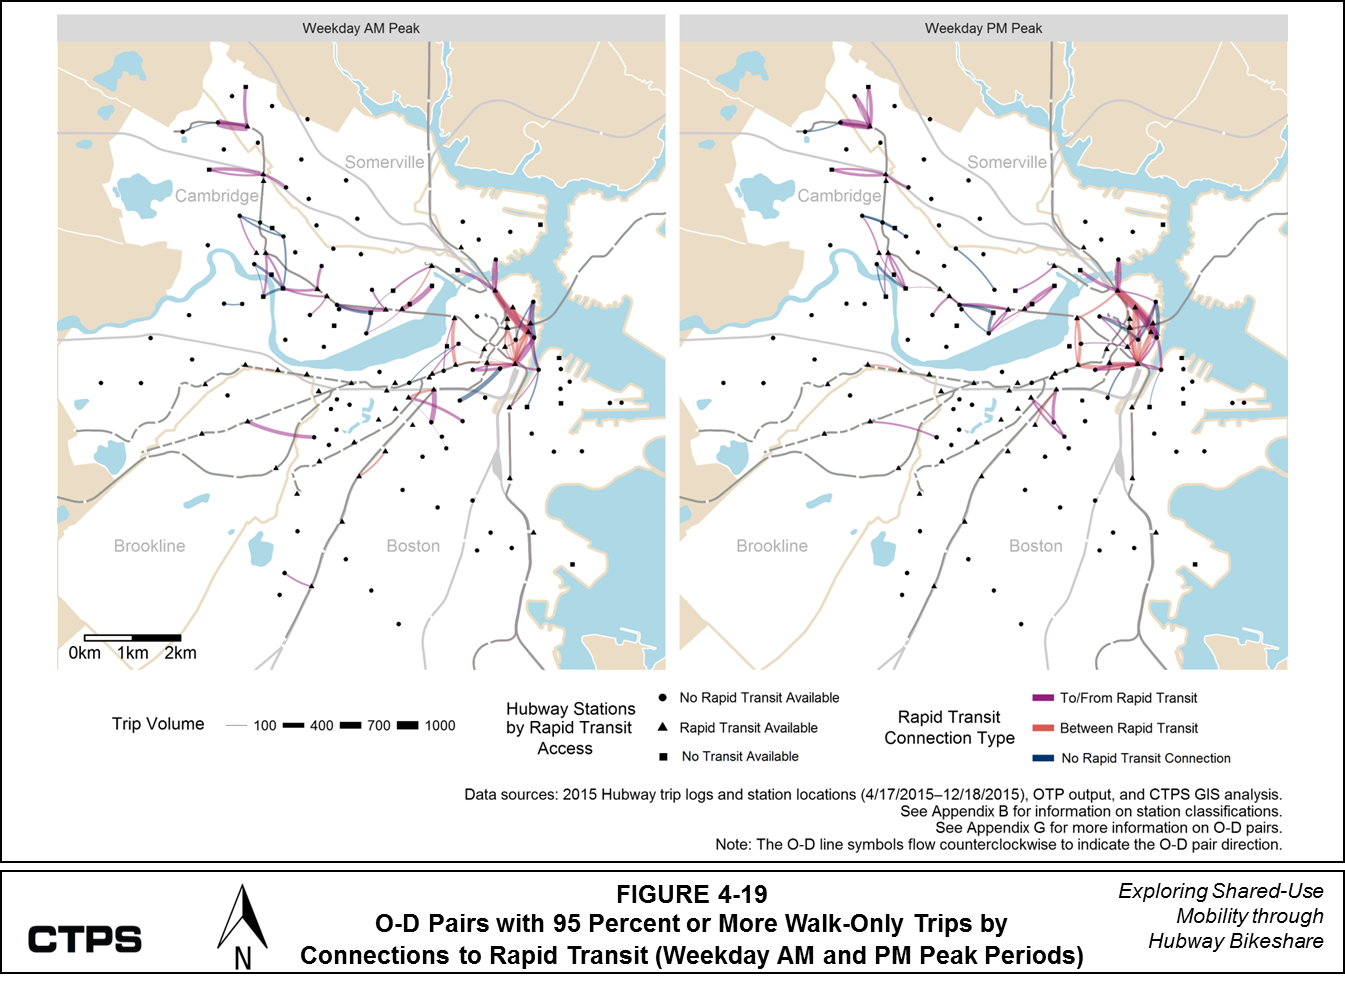 FIGURE 4-19: O-D Pairs with 95 Percent or More Walk-Only Trips by Connections to Rapid Transit (Weekday AM and PM Peak Periods): This series of two maps shows origin-destination (O-D) pairs of Hubway member trips. One map shows O-D pairs during the weekday AM peak period, and the other shows O-D pairs during the weekday PM peak period. These O-D pairs are classified according to their trip volume and the number of trip ends that were near transit, particularly rapid transit. At least 95 percent of the trips in these pairs had “walk-only” travel itineraries generated by Open Trip Planner (OTP). More information about these O-D pairs is available in Appendix G. The maps also classify Hubway stations by whether or not transit, particularly rapid transit, is accessible within 200 meters. 